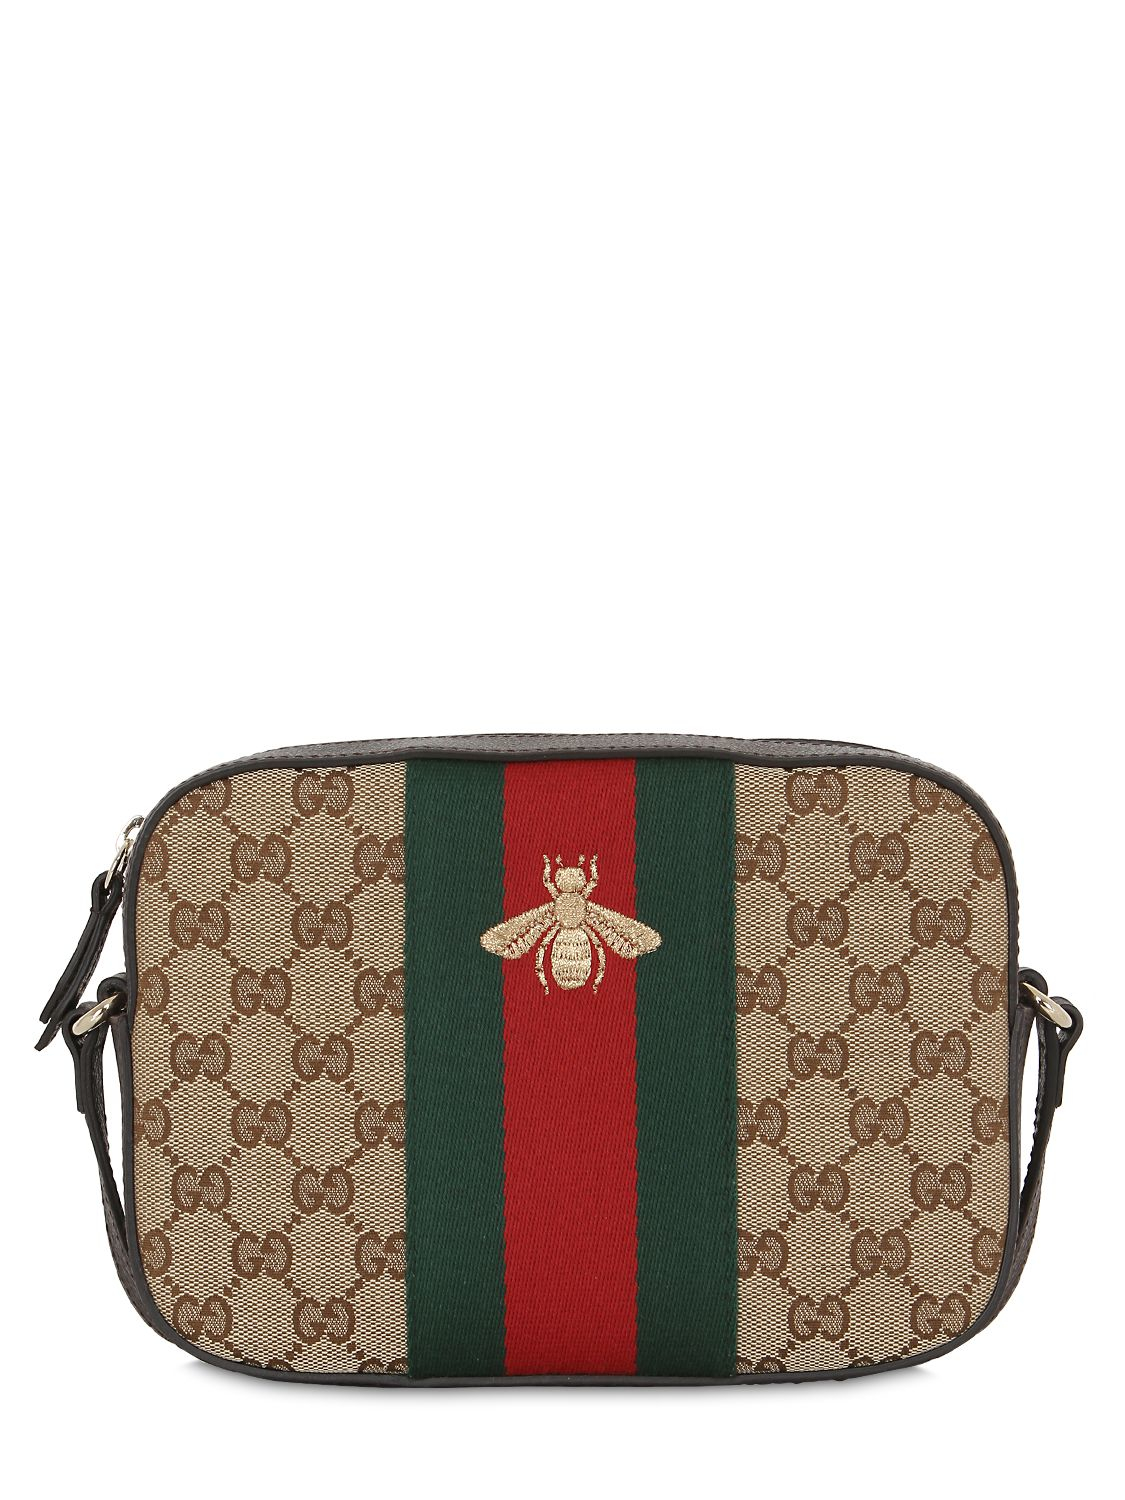 Lyst - Gucci Bee Embroidered Leather Shoulder Bag in Black